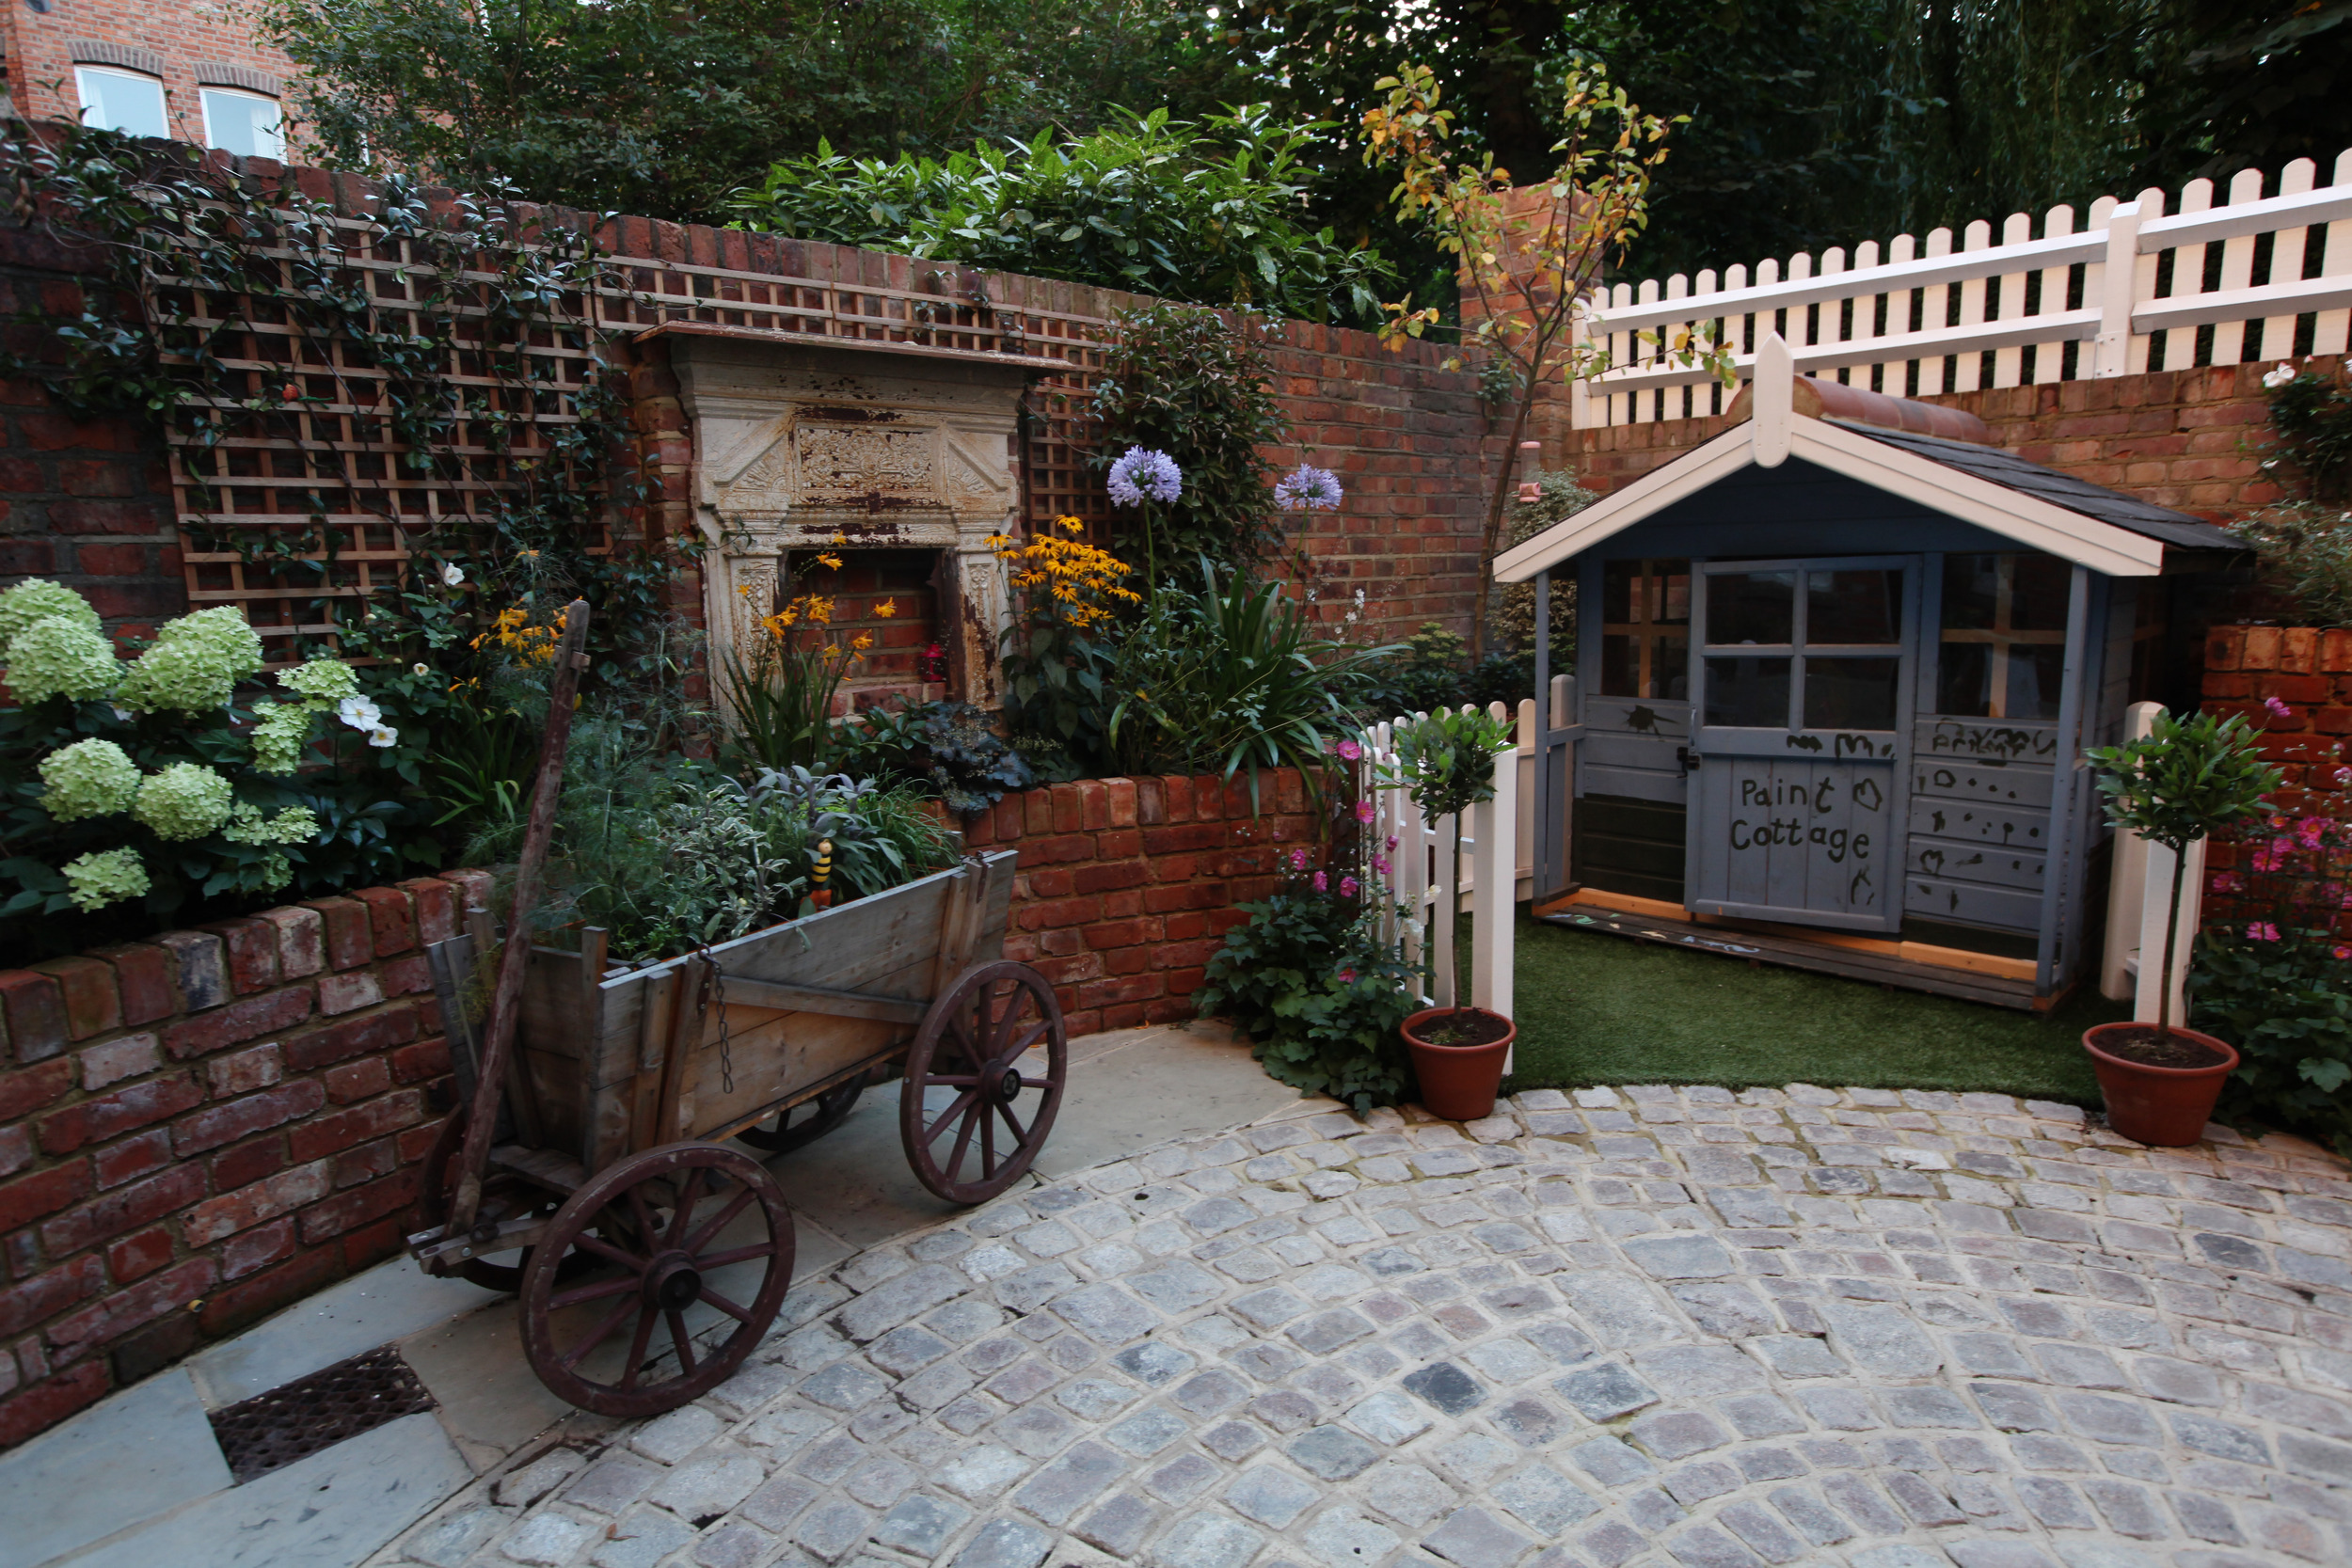 Fun garden design idea with play house, hand cart and fireplace